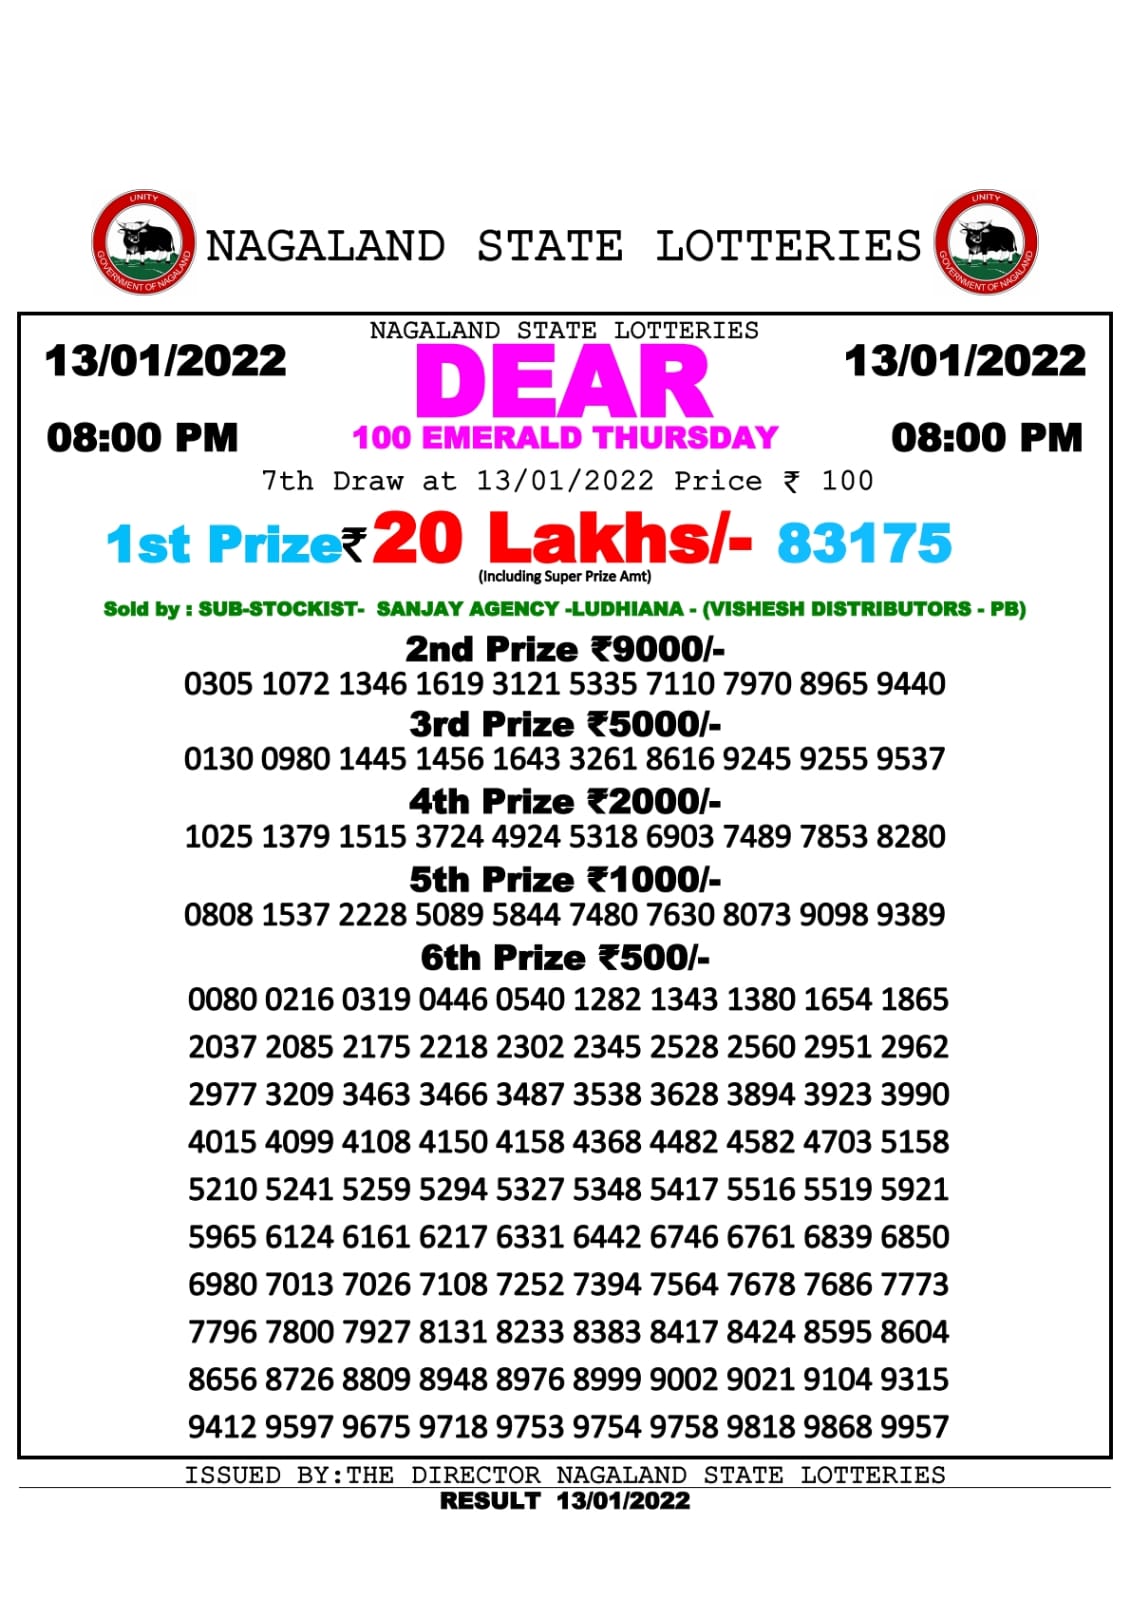 NAGALLAND STATE DEAR 100 WEEKLY LOTTERY 8 pm 13-01-2022